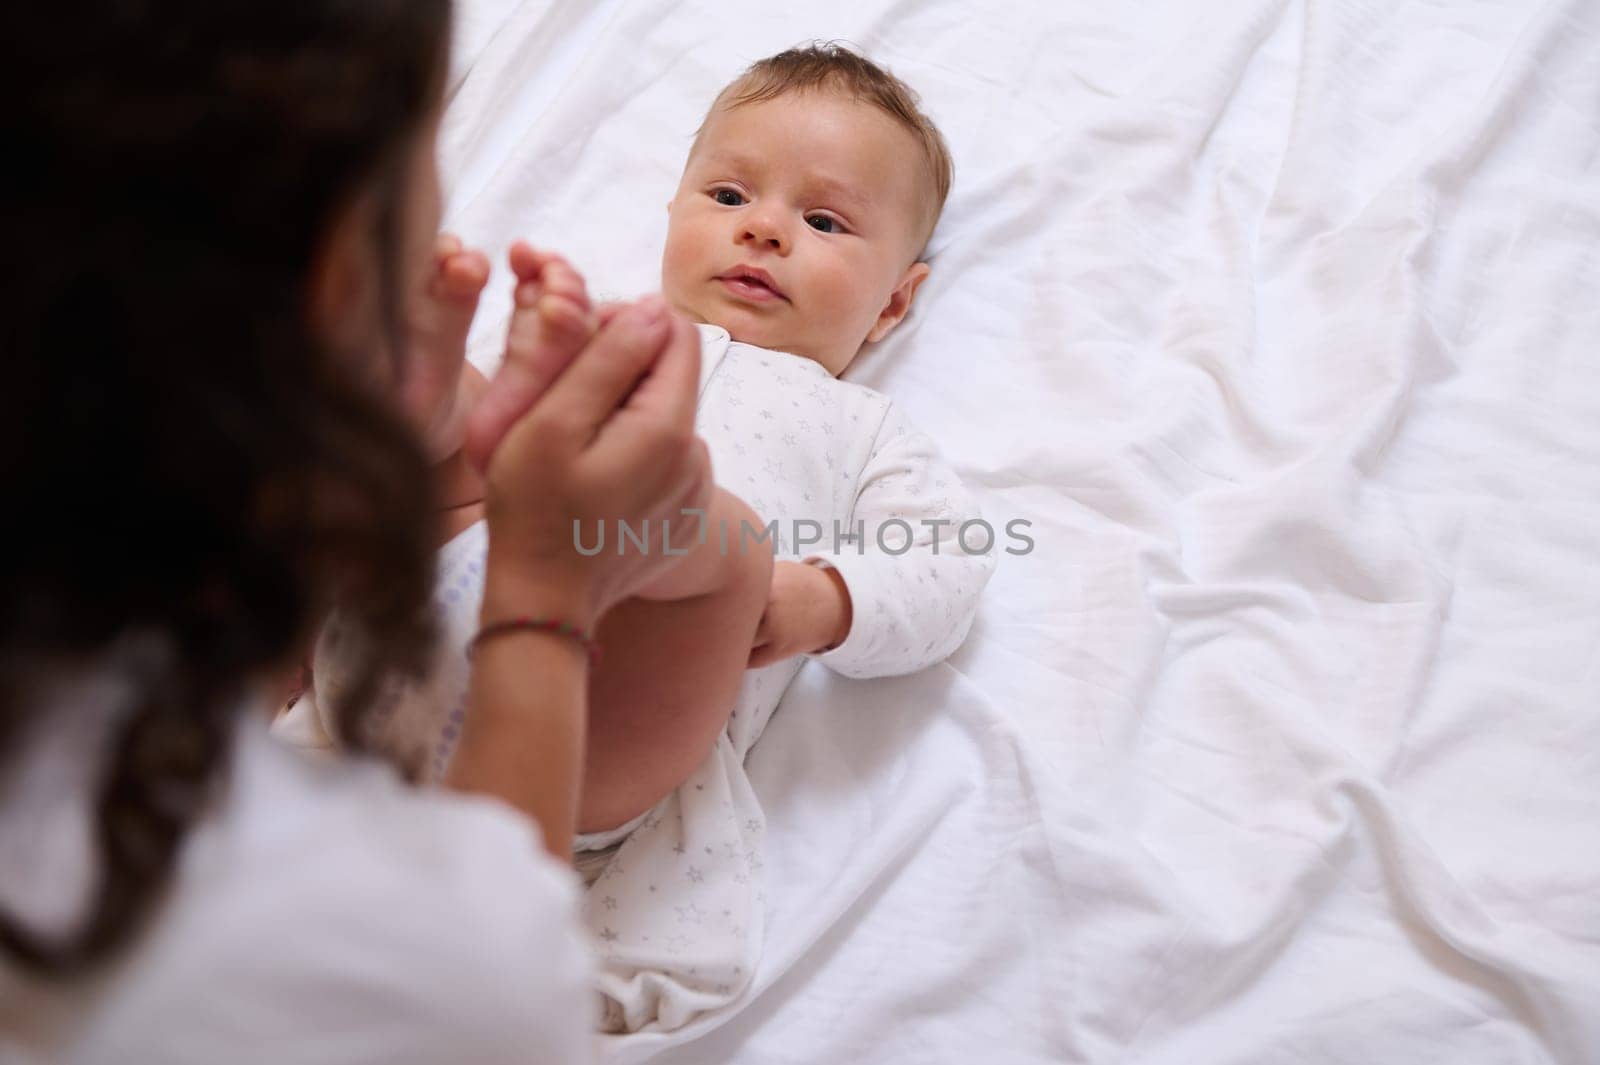 Overhead view of a multi ethnic loving mom kissing little feet and tiny toes of her adorable beloved baby boy. Baby care, infancy, babyhood, maternity leave lifestyle concept. Copy advertising space